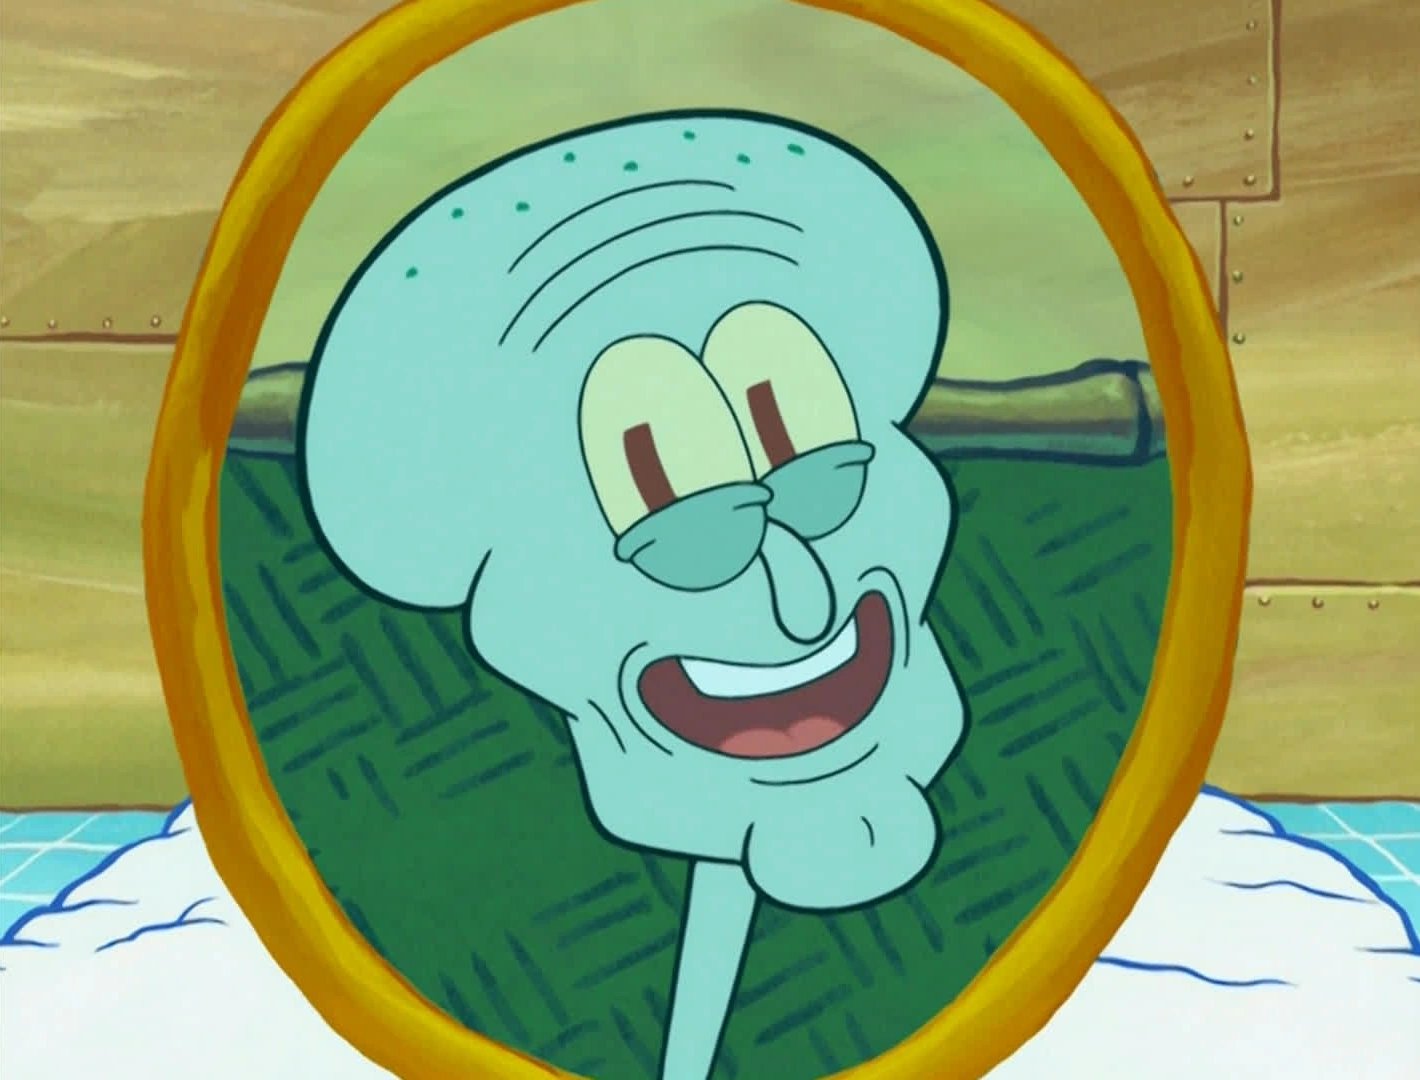 Squidward Tentacles On Twitter Y Know Even Though The Reconstruction Of My Facial Muscles Is